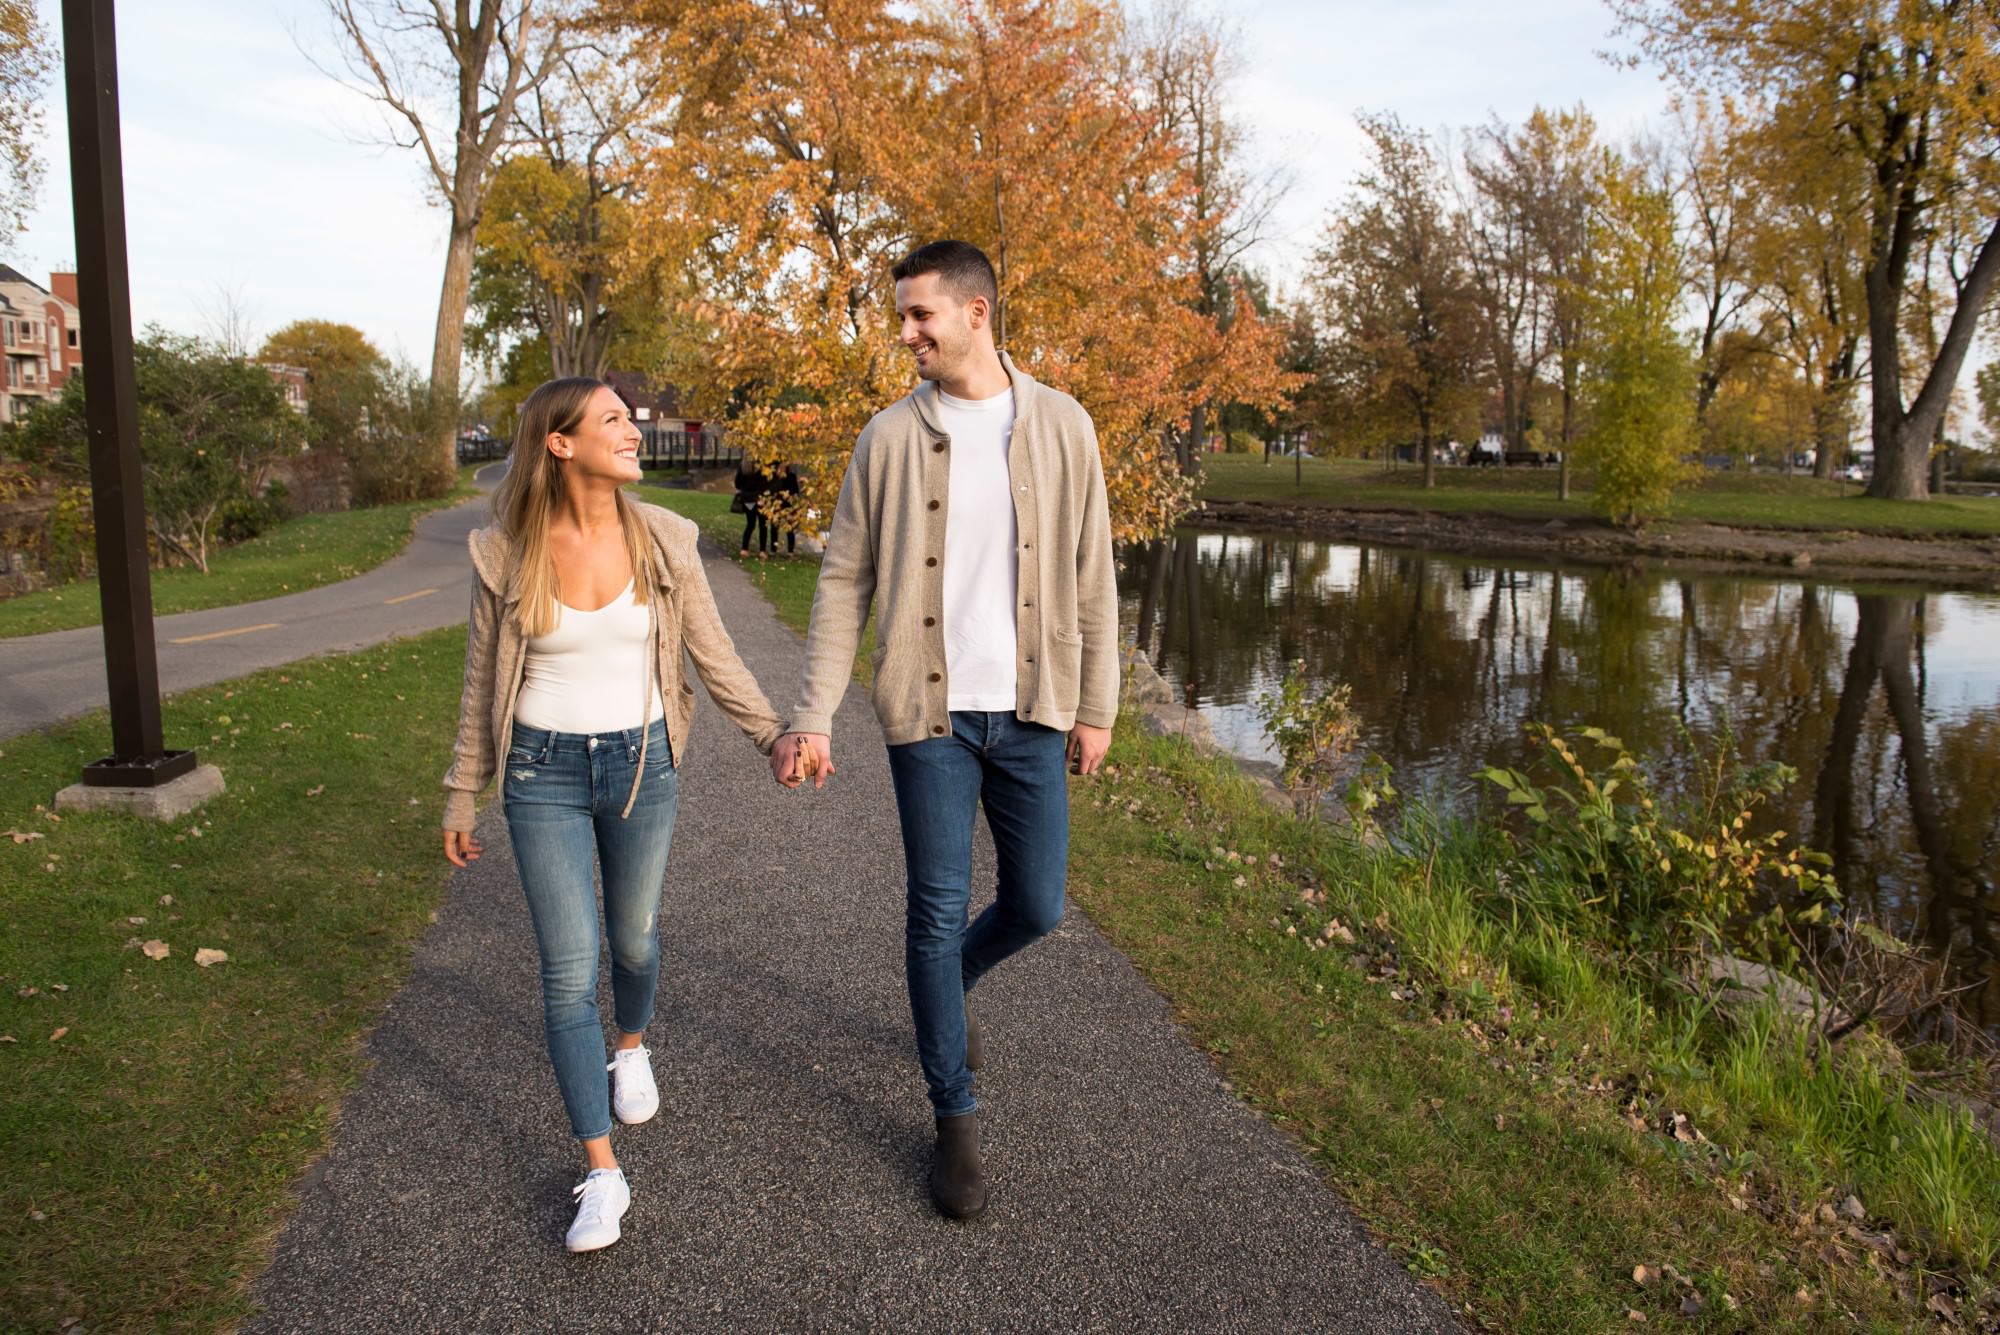 suzy rossdeutscher greg kirstein jeans casual engagement esession prewedding photoshoot shoot lachine canal jewish young trendy romantic couple looking each other matching outfits walking